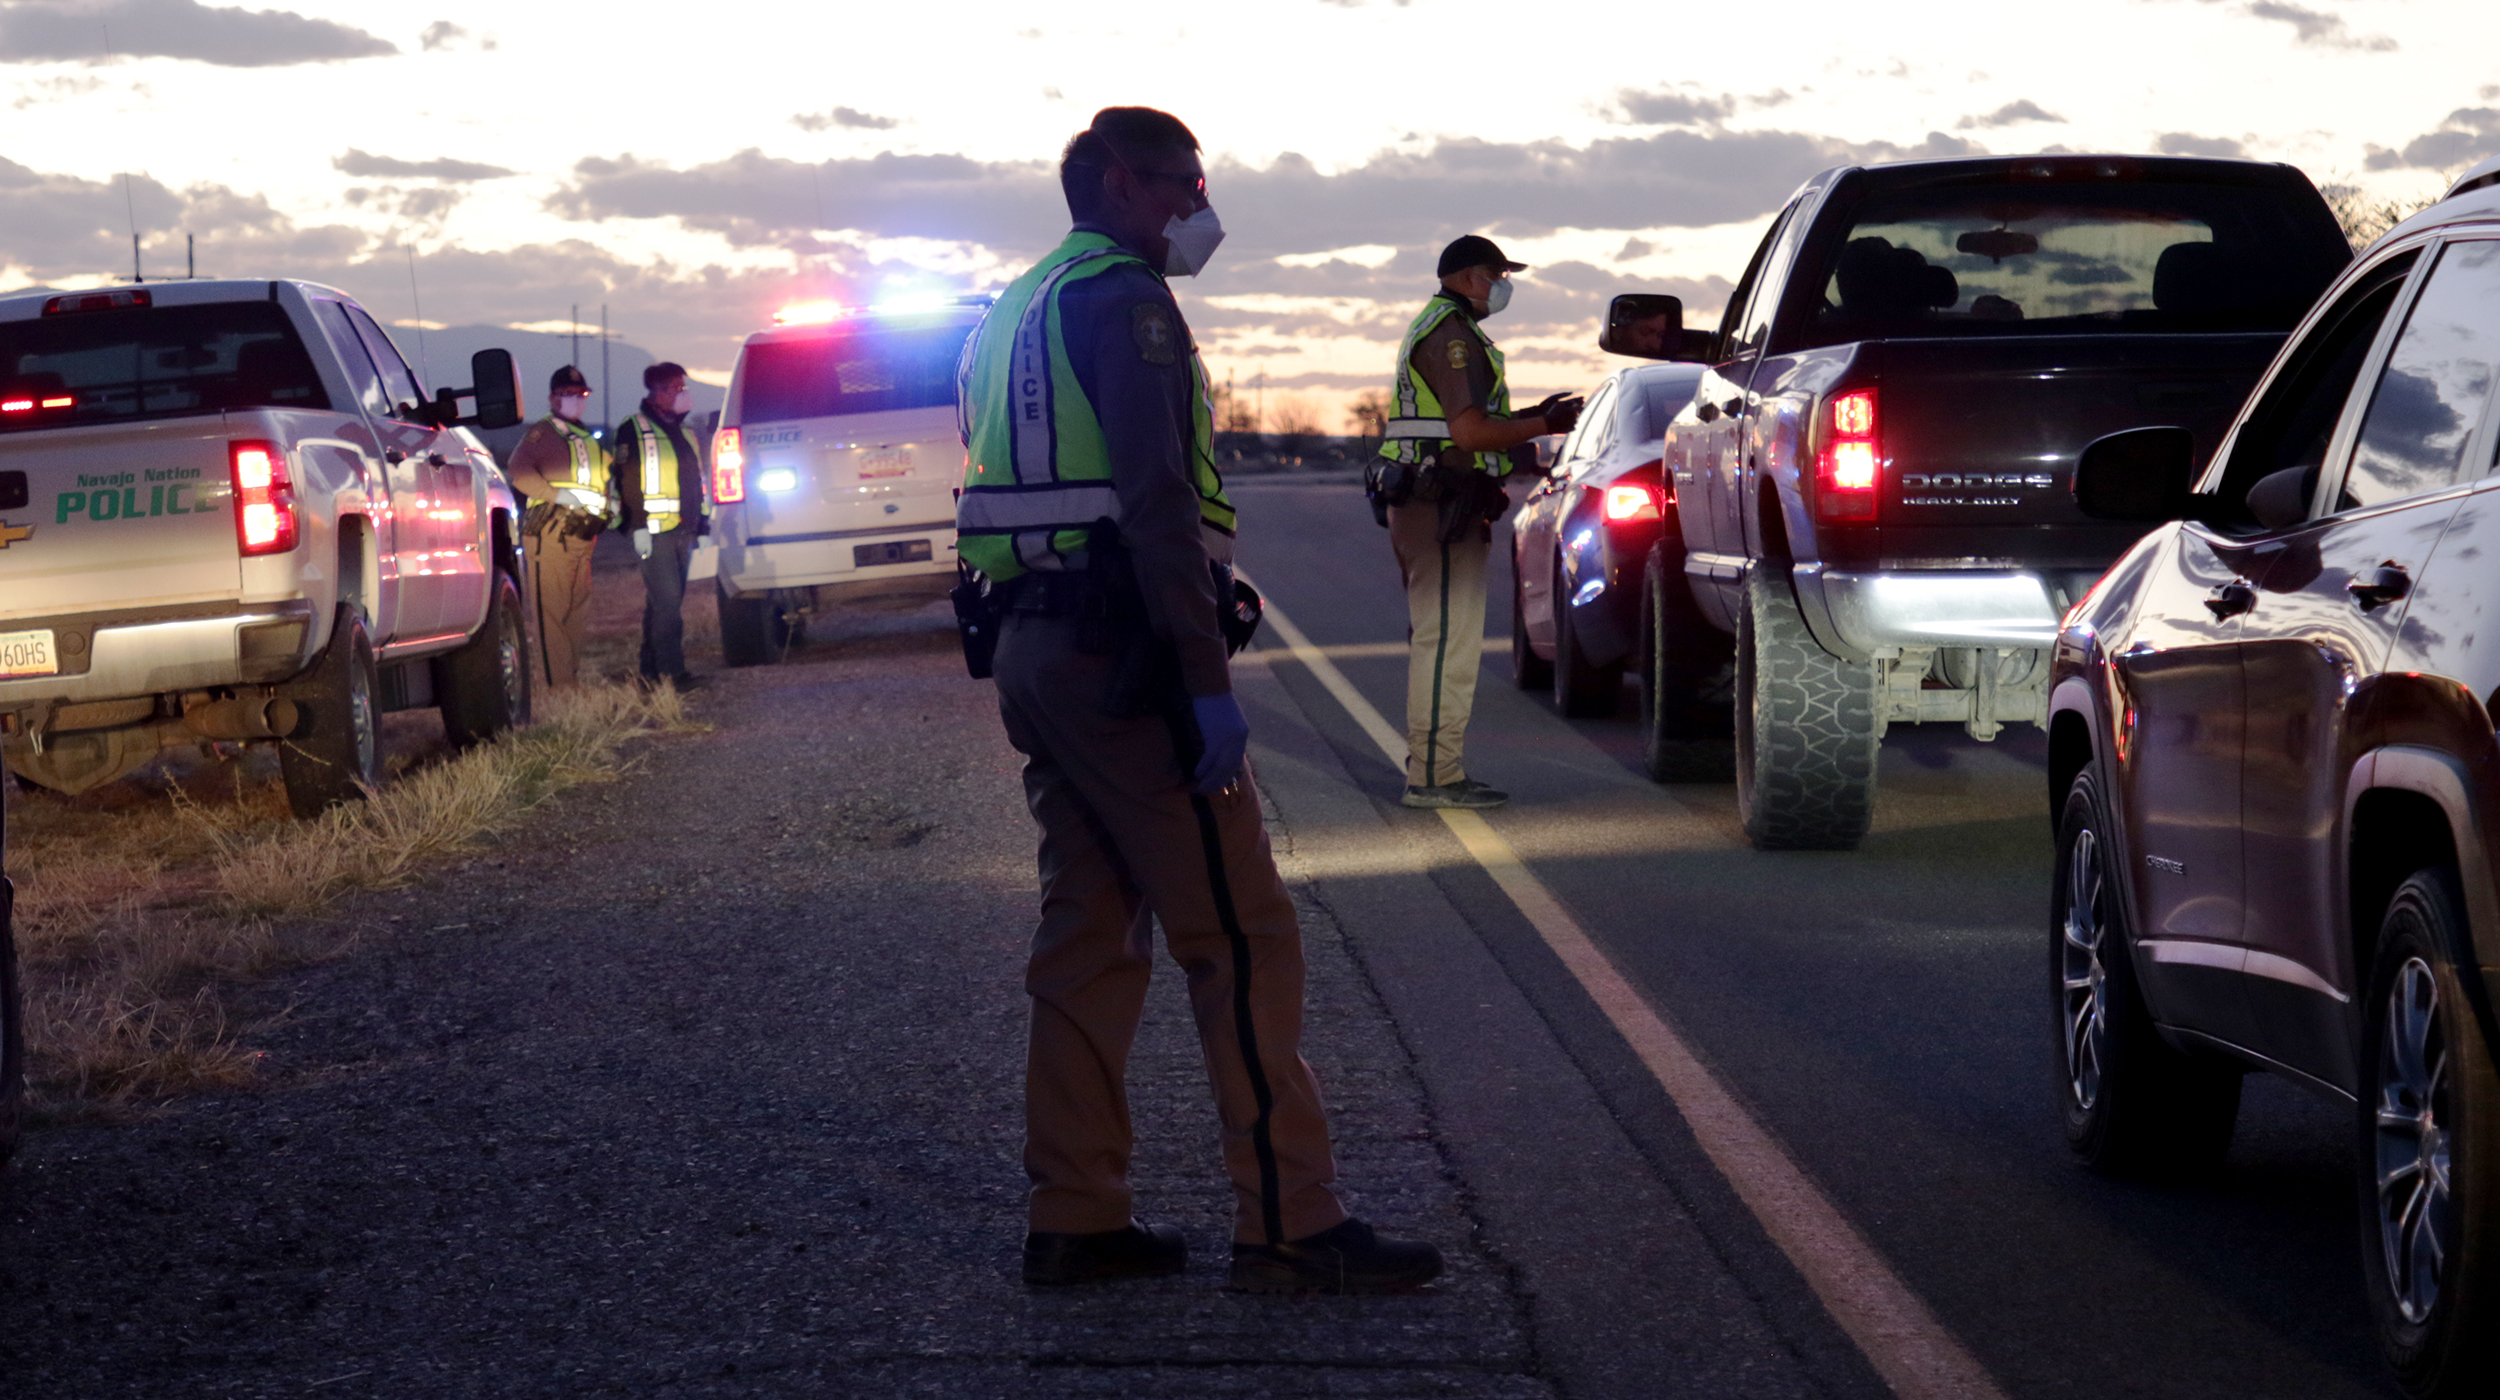 The Navajo Police Department has been holding checkpoints to share information about the curfew order on the Navajo Nation. (Courtesy of Farmington Daily Times/Noel Lyn Smith)
